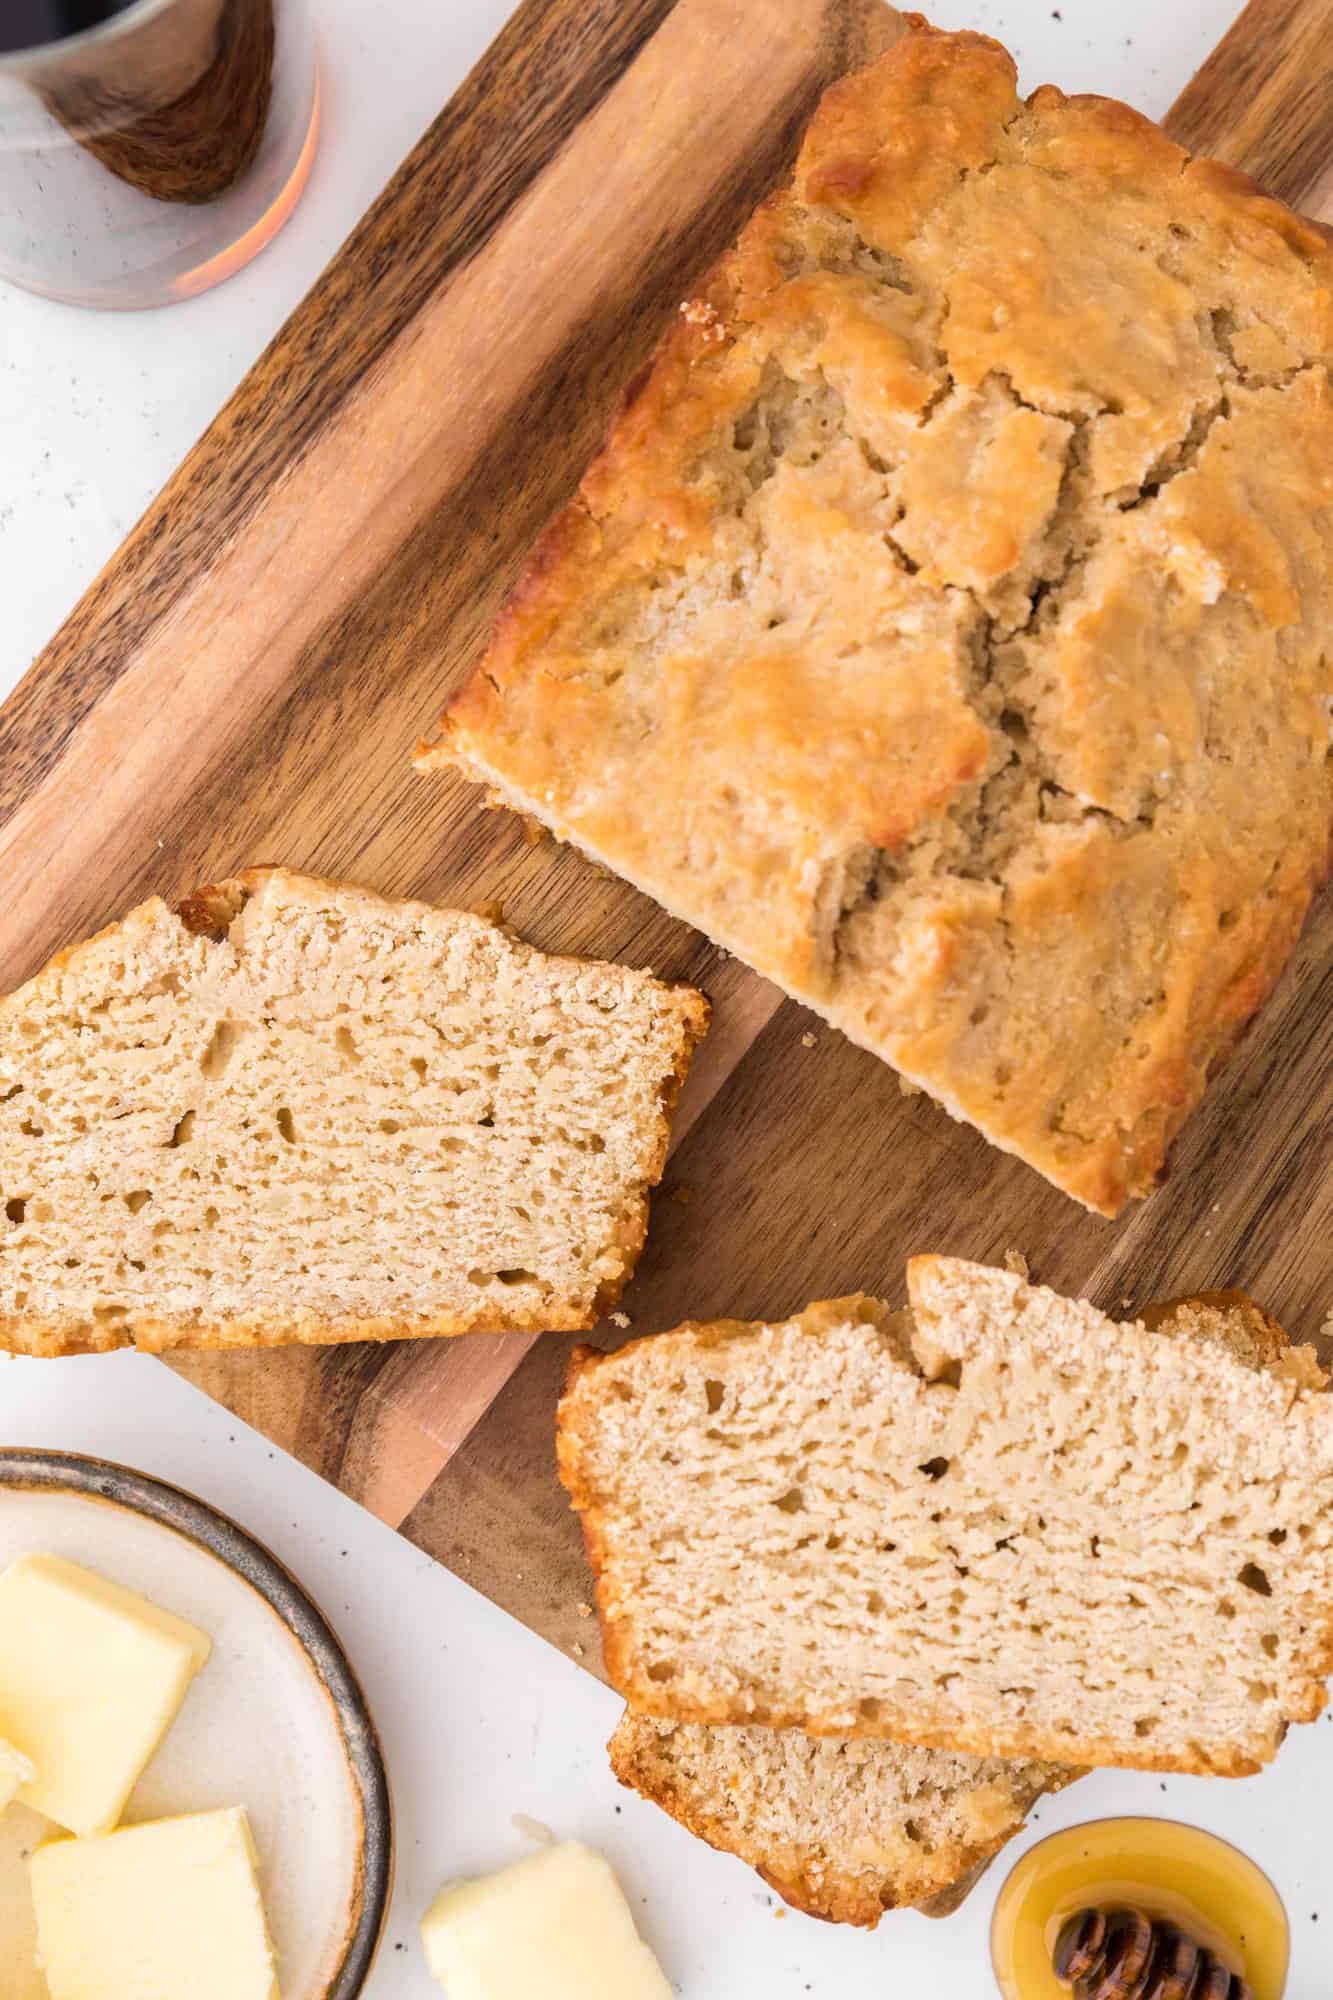 Beer bread, sliced to show texture.